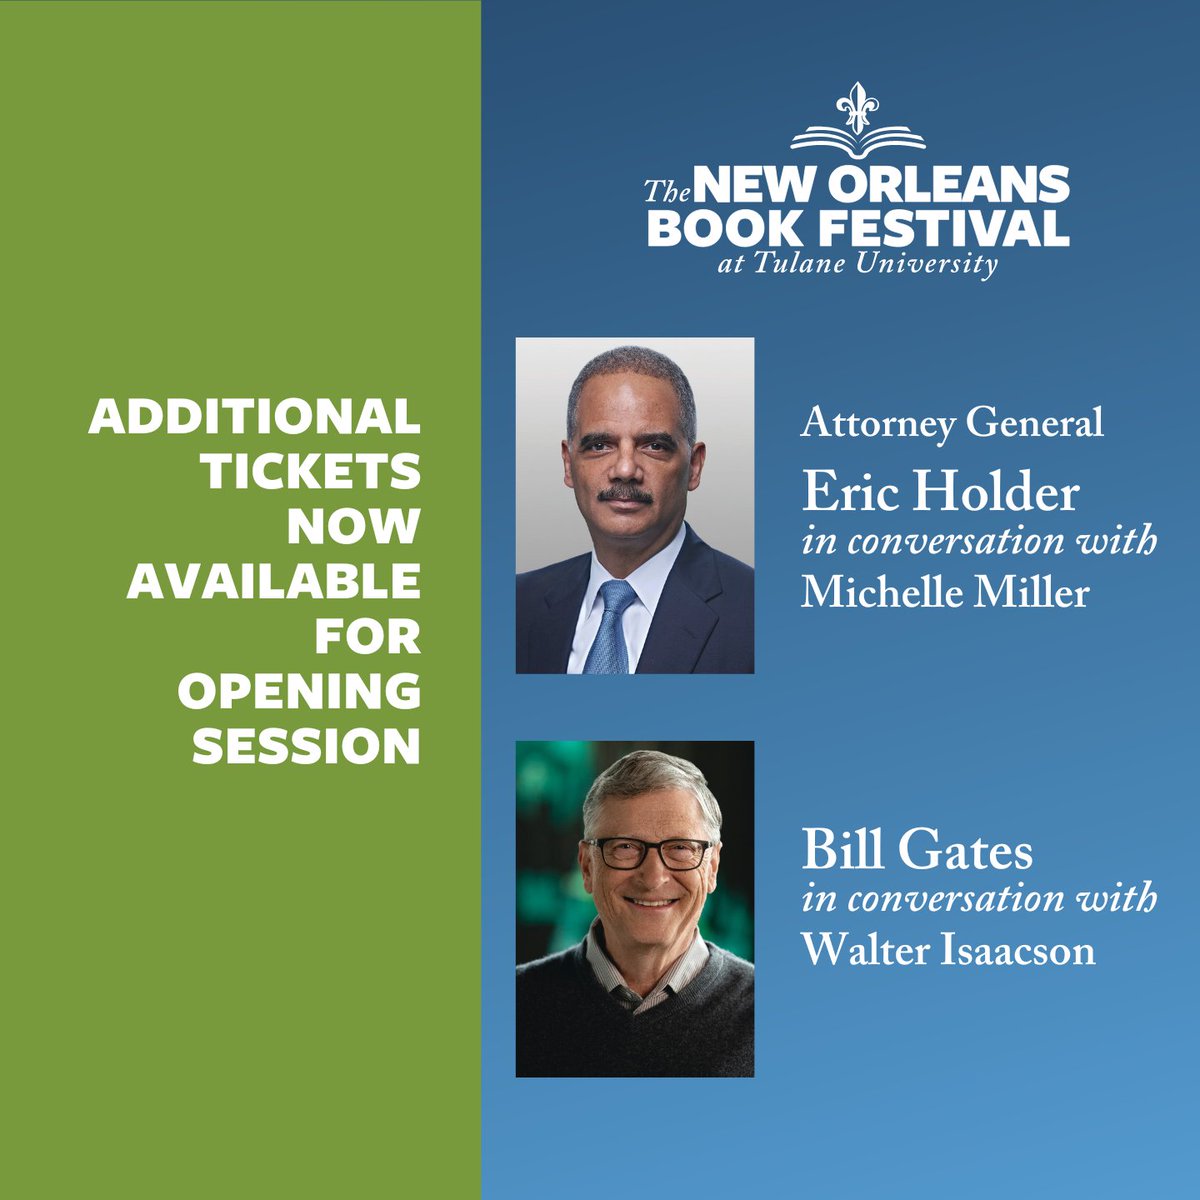 Big Update!! A limited number of tickets are now available for the #NOLABookFest Opening Session with @EricHolder @BillGates @CBSMMiller and @WalterIsaacson! Get your tickets while they last! ➡️ bit.ly/3ZqL6FJ